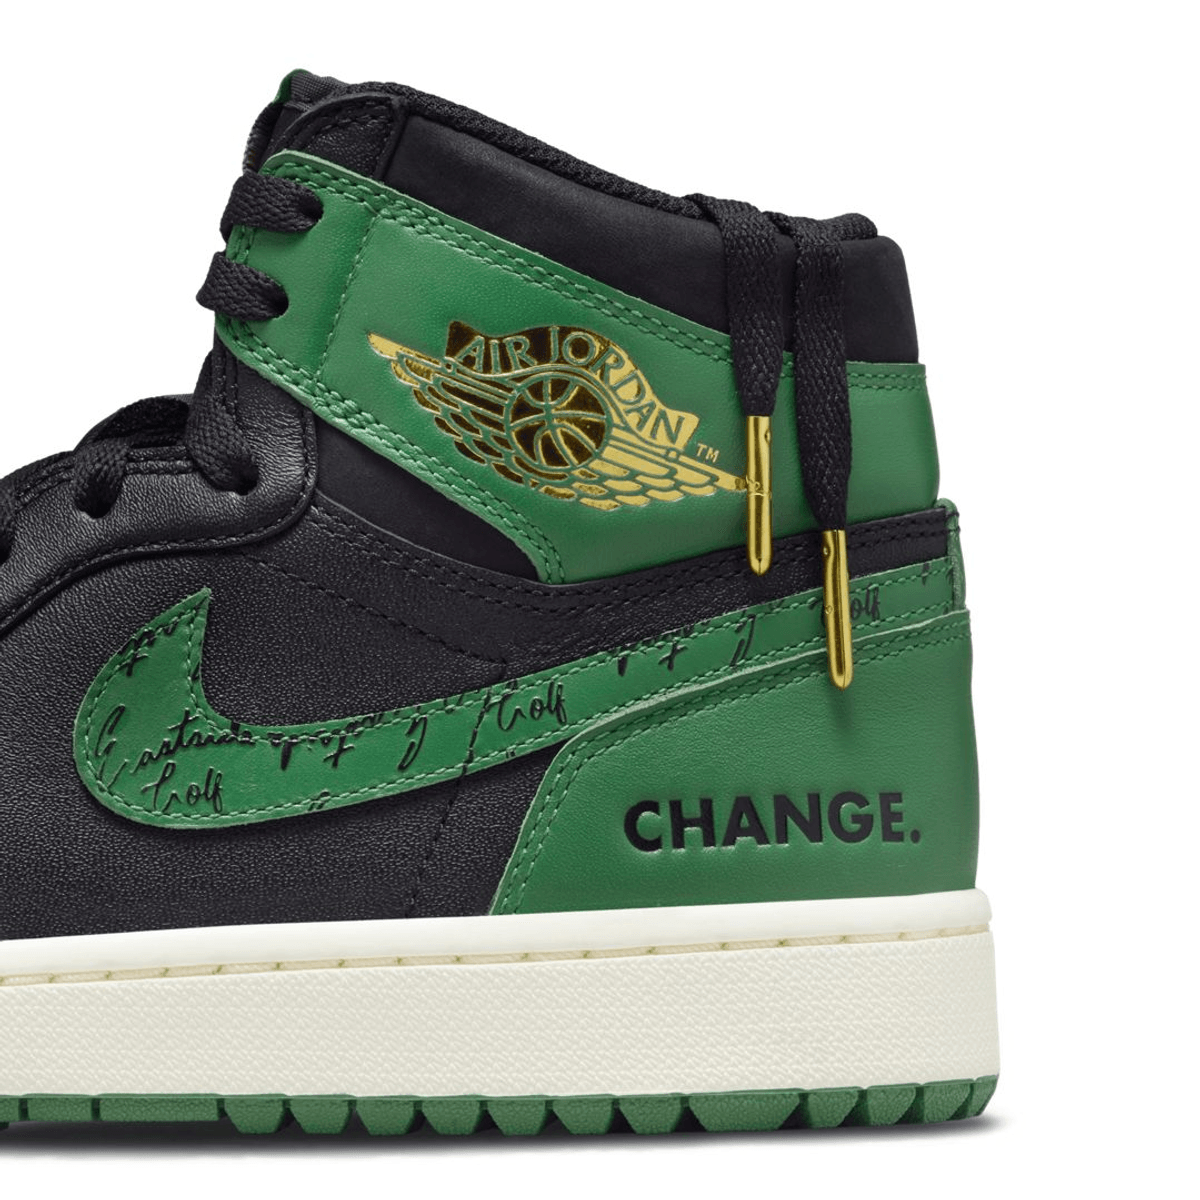 Eastside Golf x Air Jordan 1 “1961”  Will Be Ready To Swing This Fall